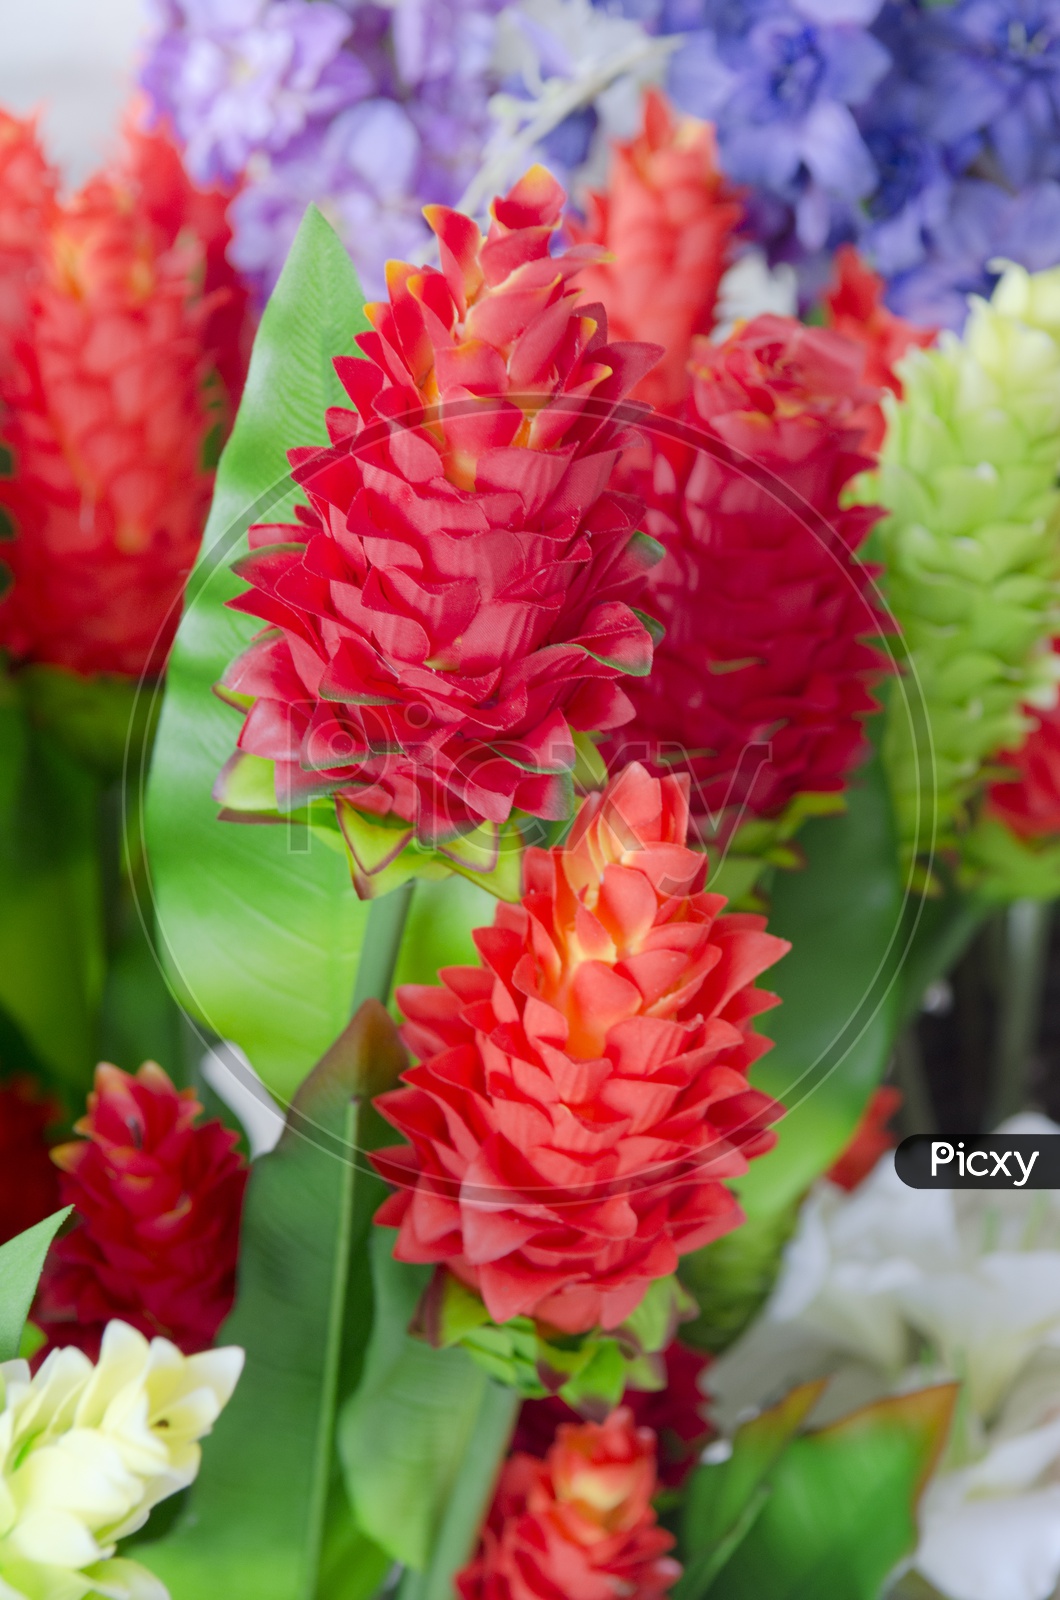 Red Ginger Flowers Blooming on Flower Plants